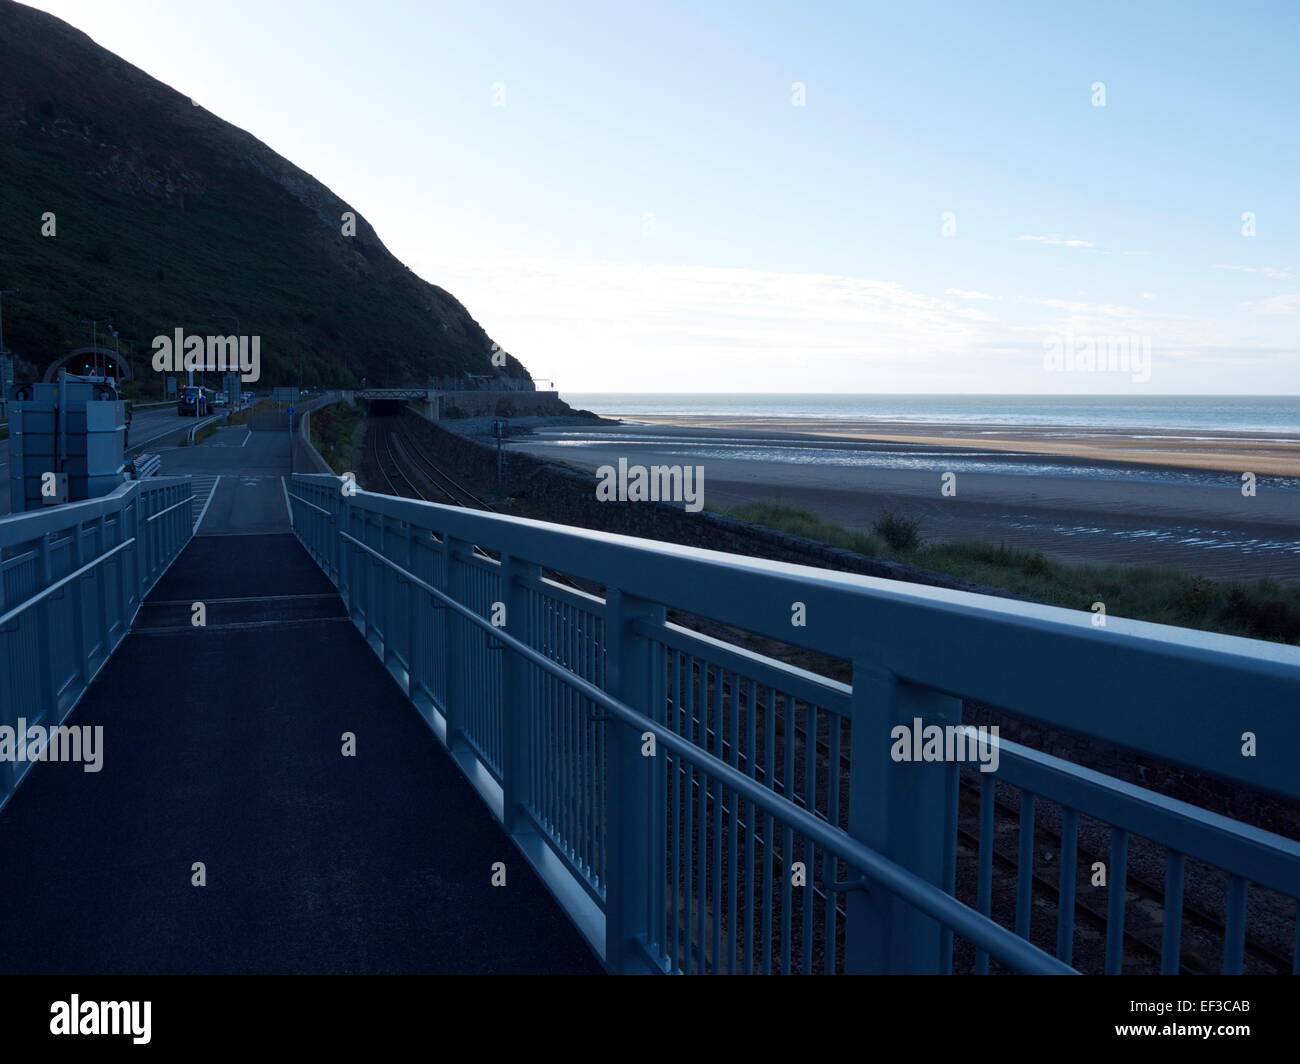 Cycle path with beaches to the right and the road heading for a tunnel on the left Stock Photo